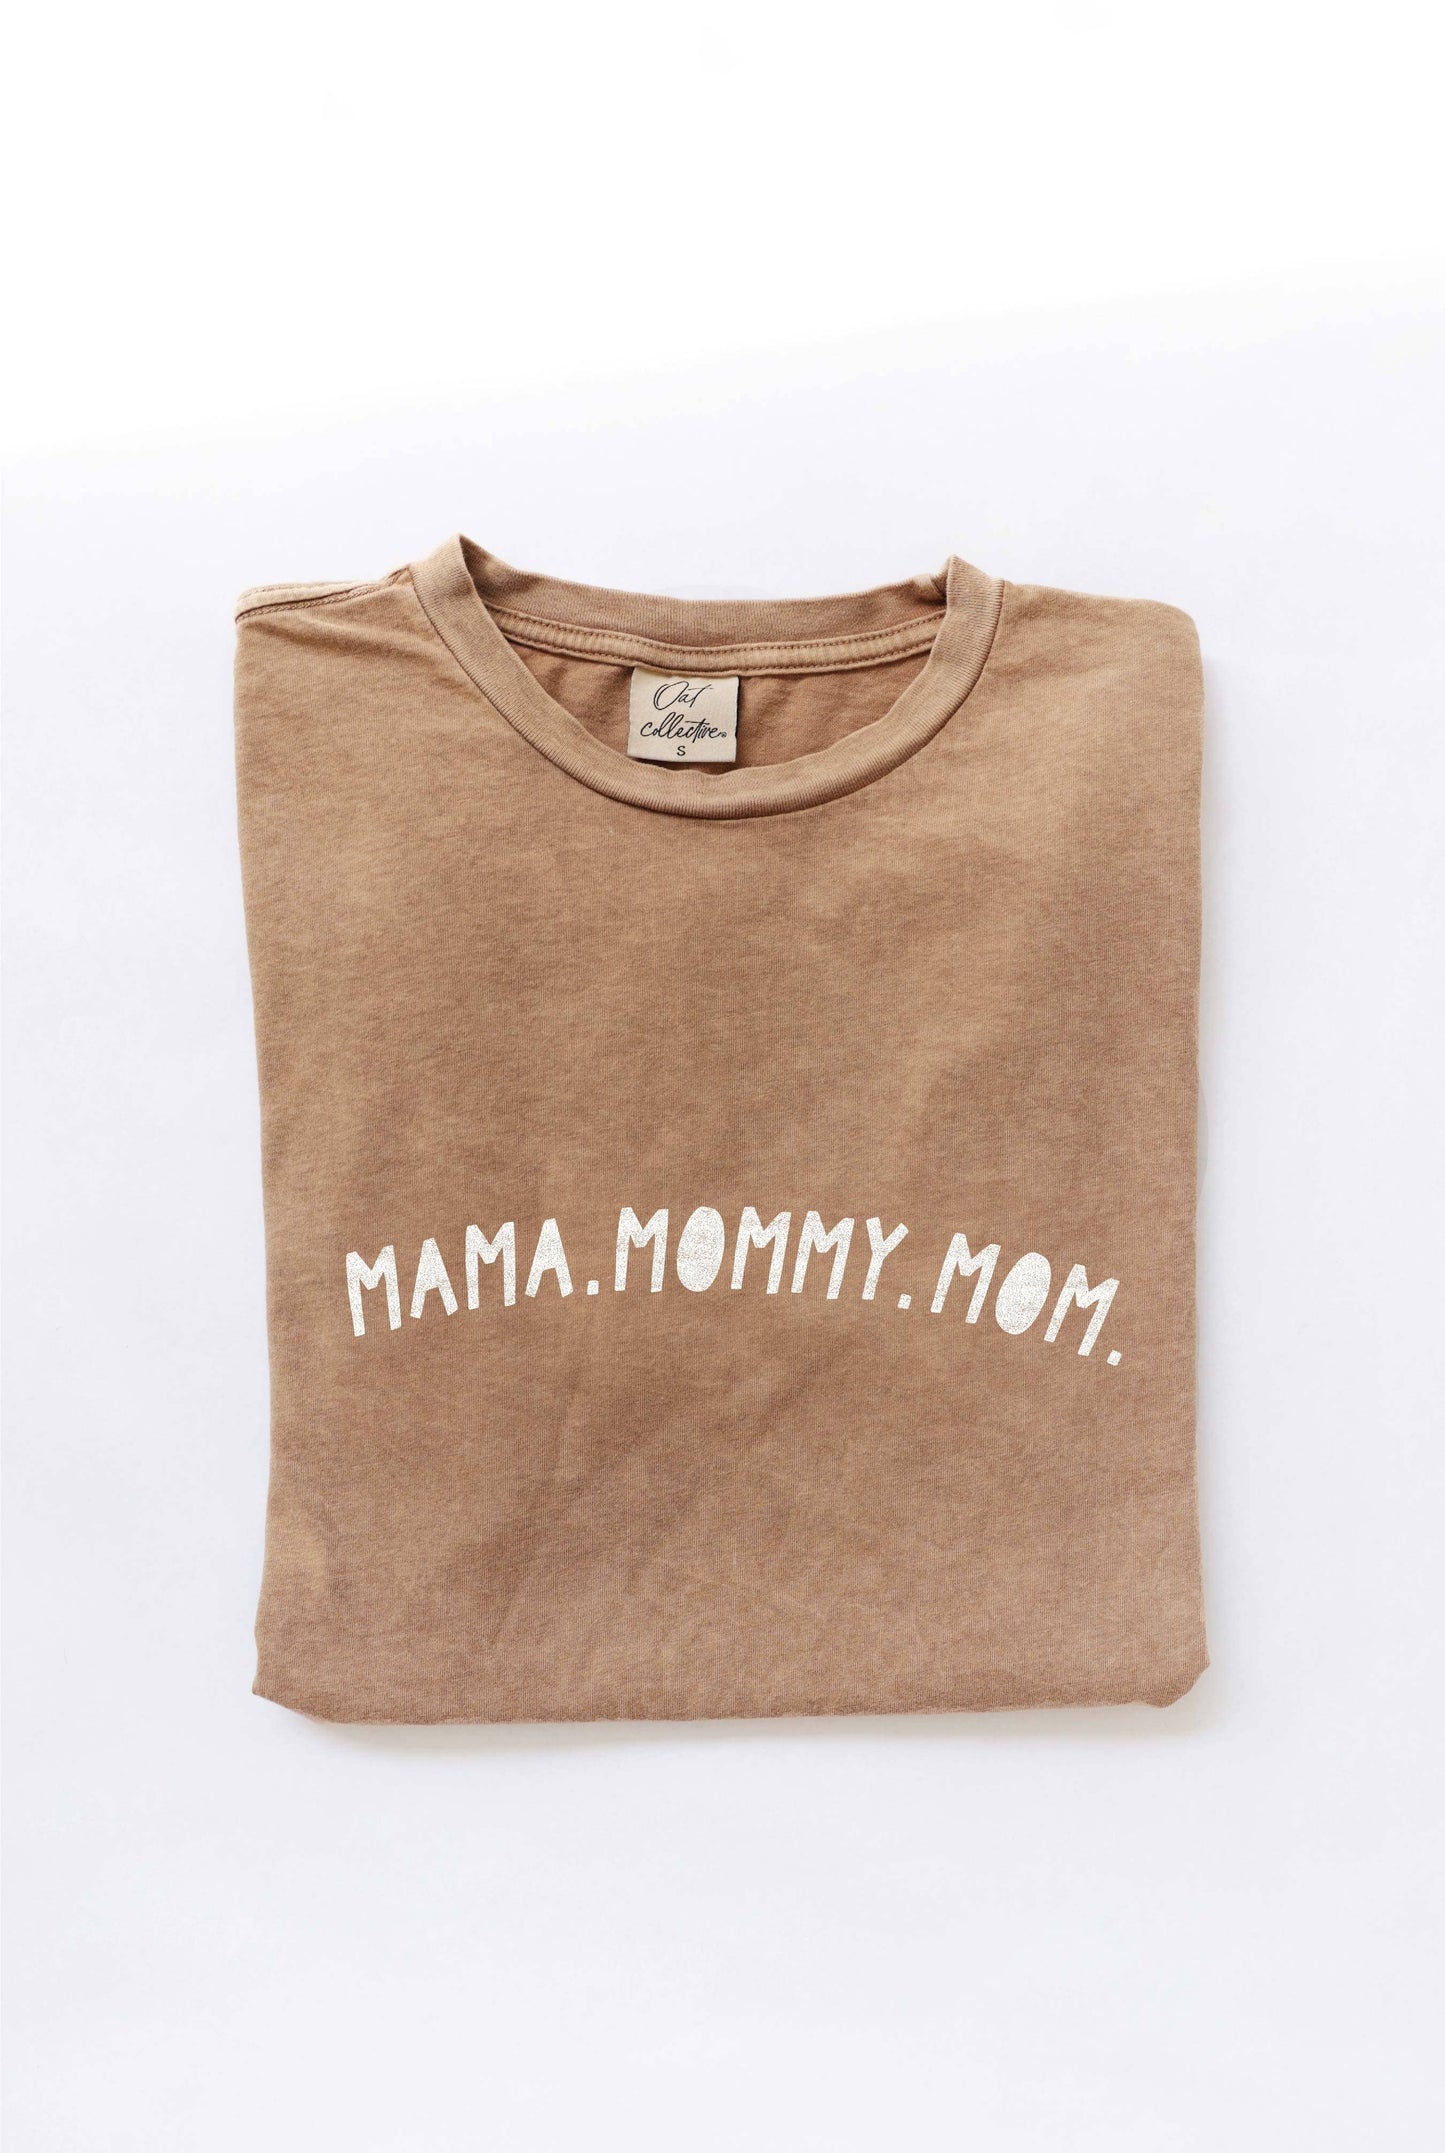 MAMA MOMMY MOM Mineral Washed Graphic Top